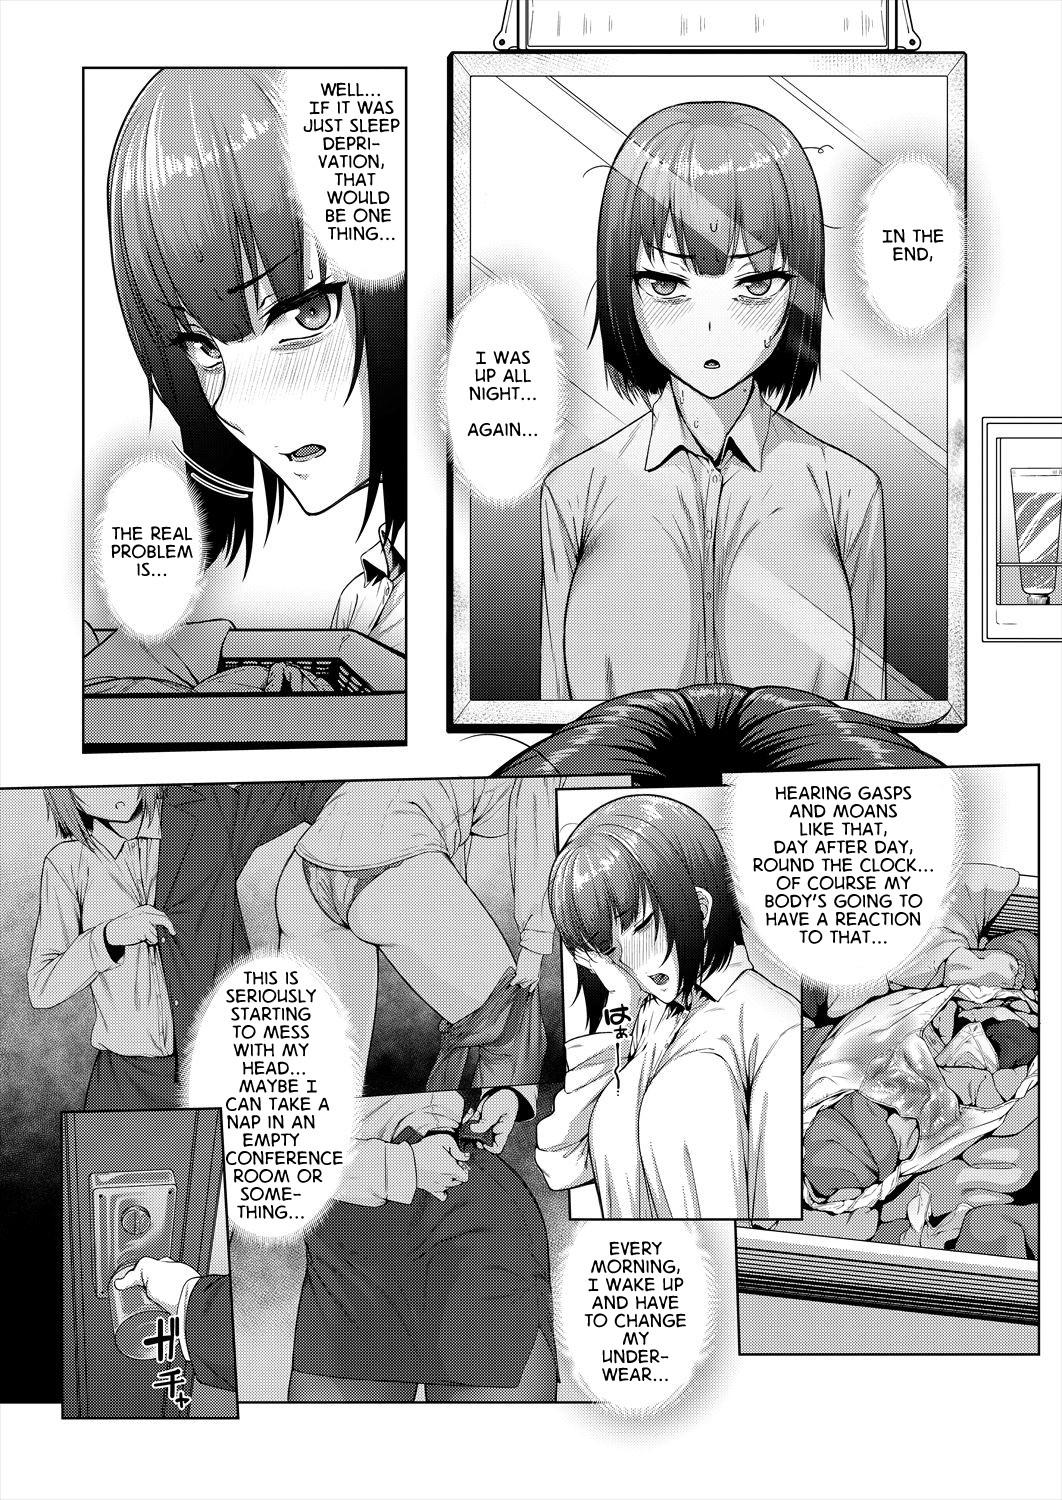 3some Kankyouon Ch. 1 | Banging Ambience Ch. 1 - Original Chicks - Page 4